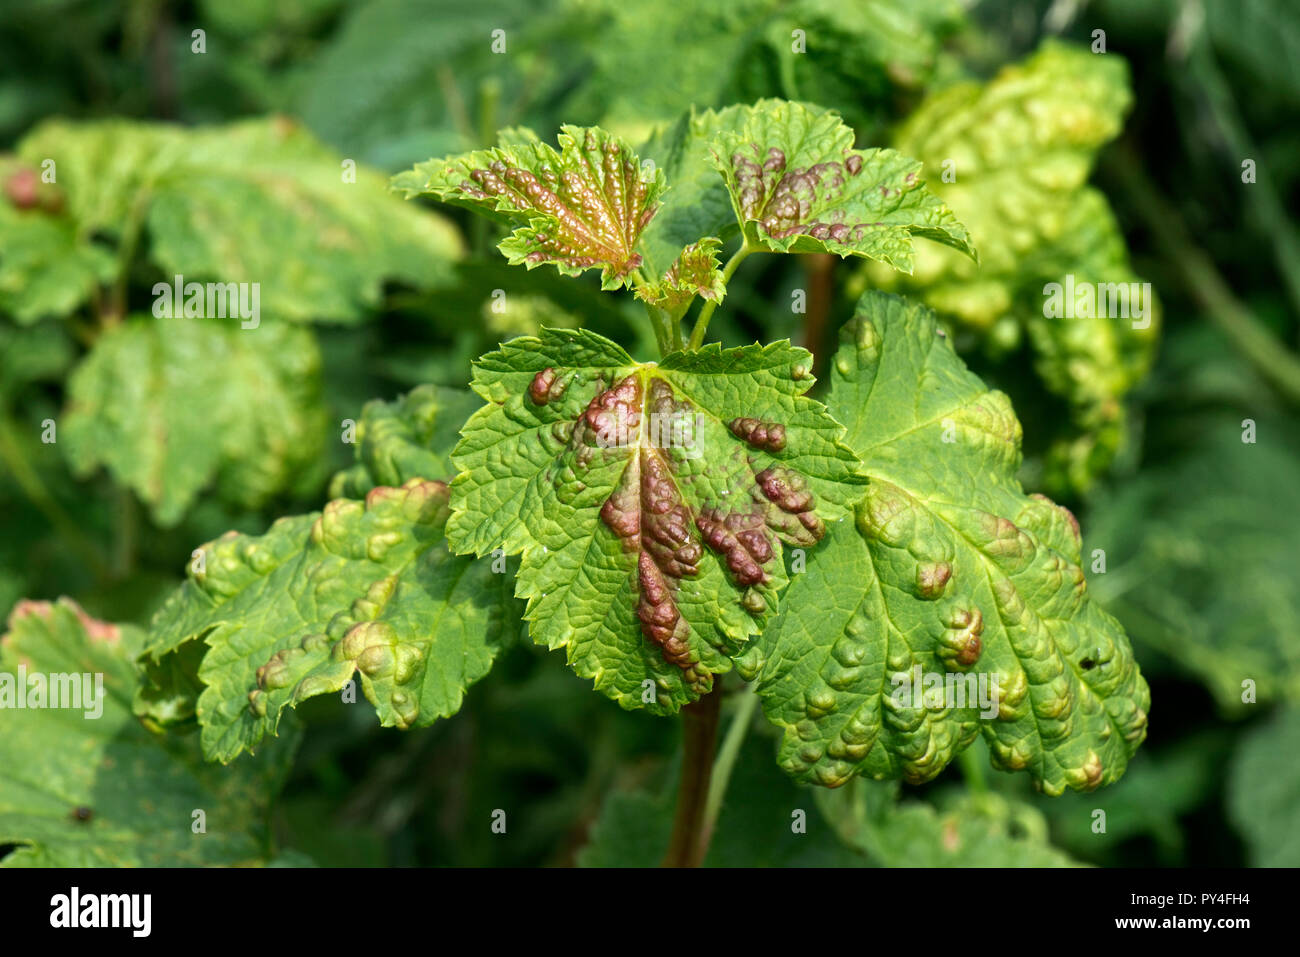 Damage to the leaves of a currant, Ribes sp., caused by currant blister ...